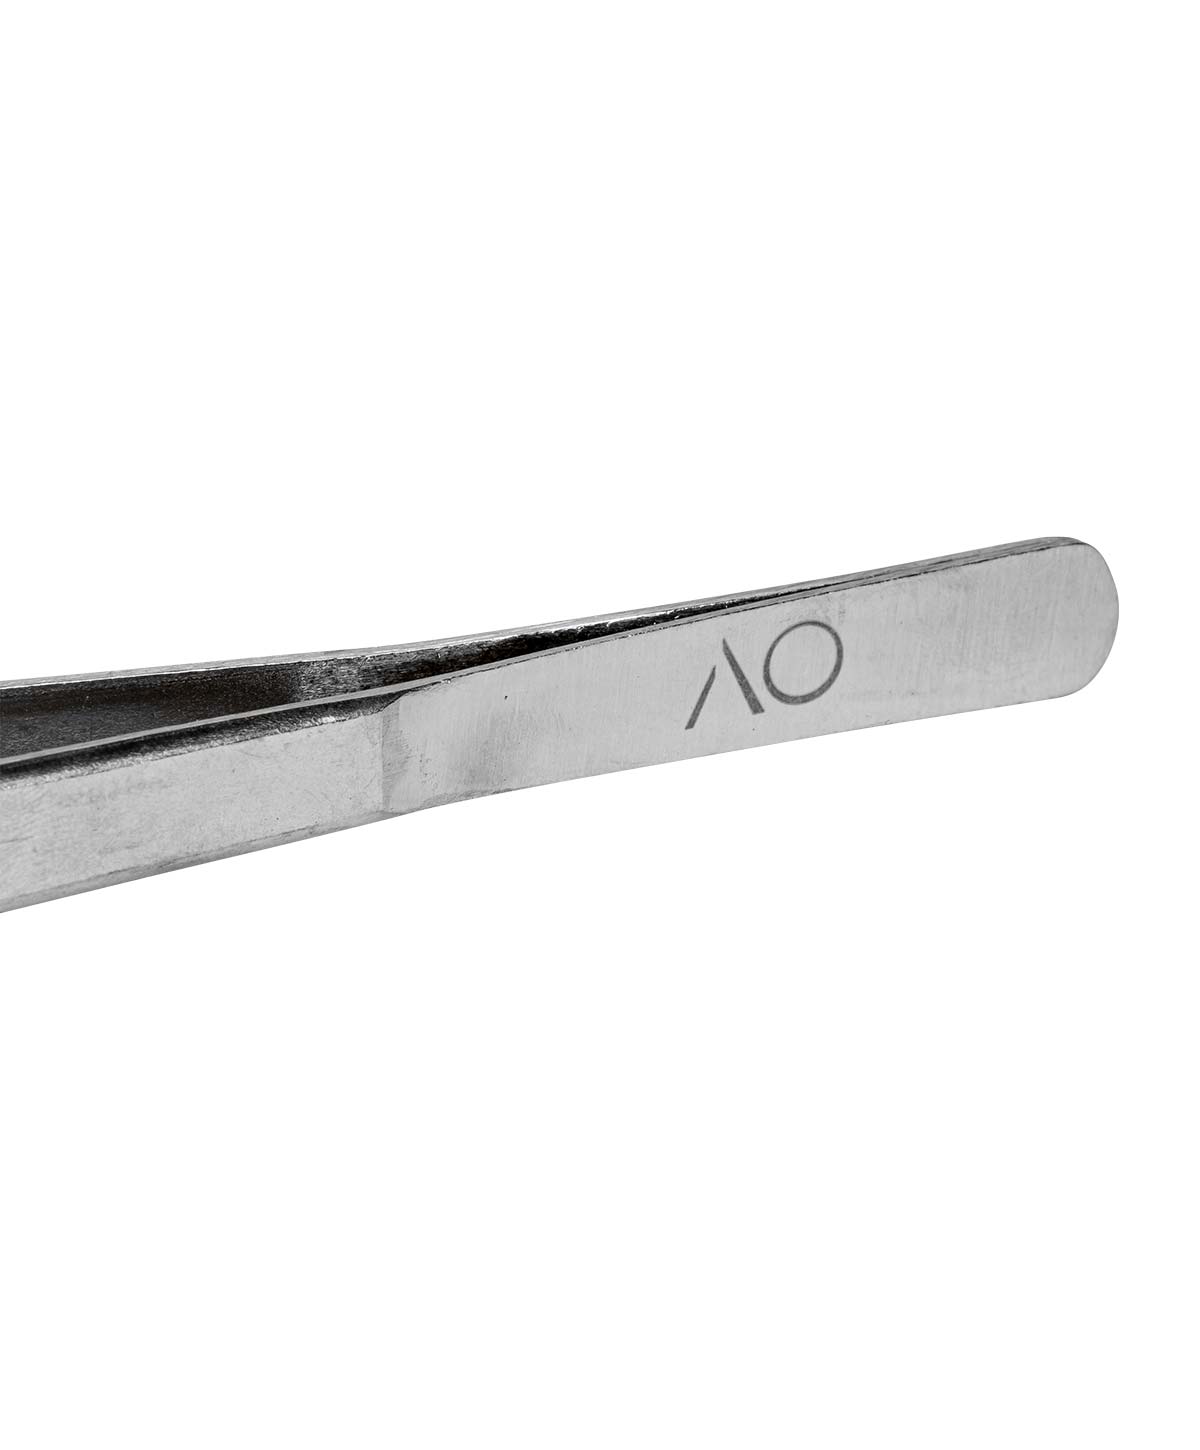 AO Charcoal  Tong - Stainless Steel